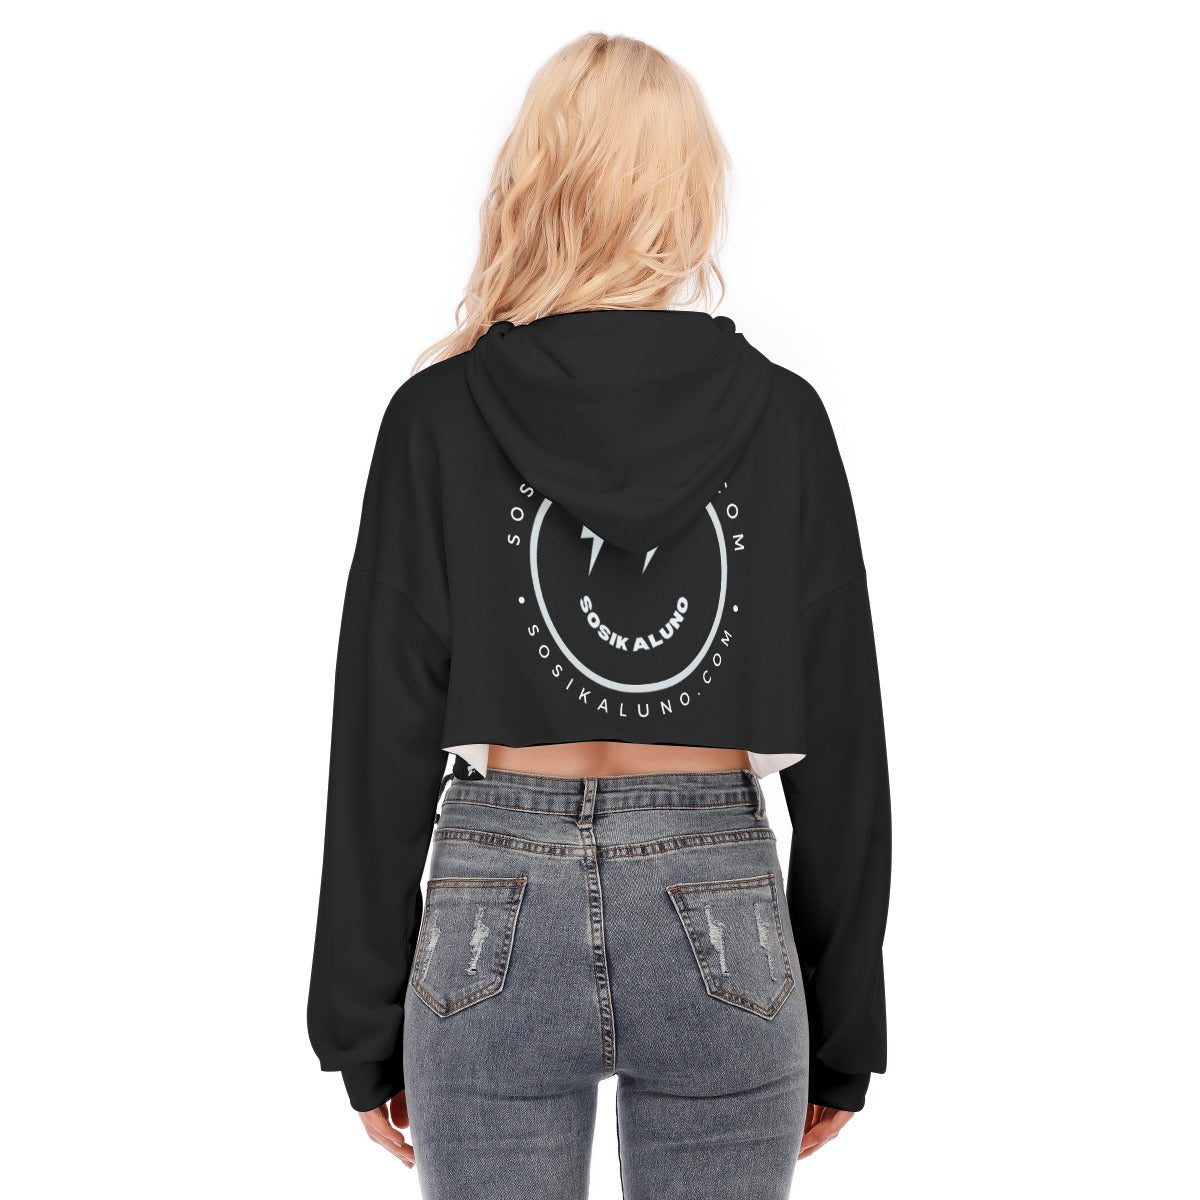 Black Women's Cropped Hoodie With Zipper